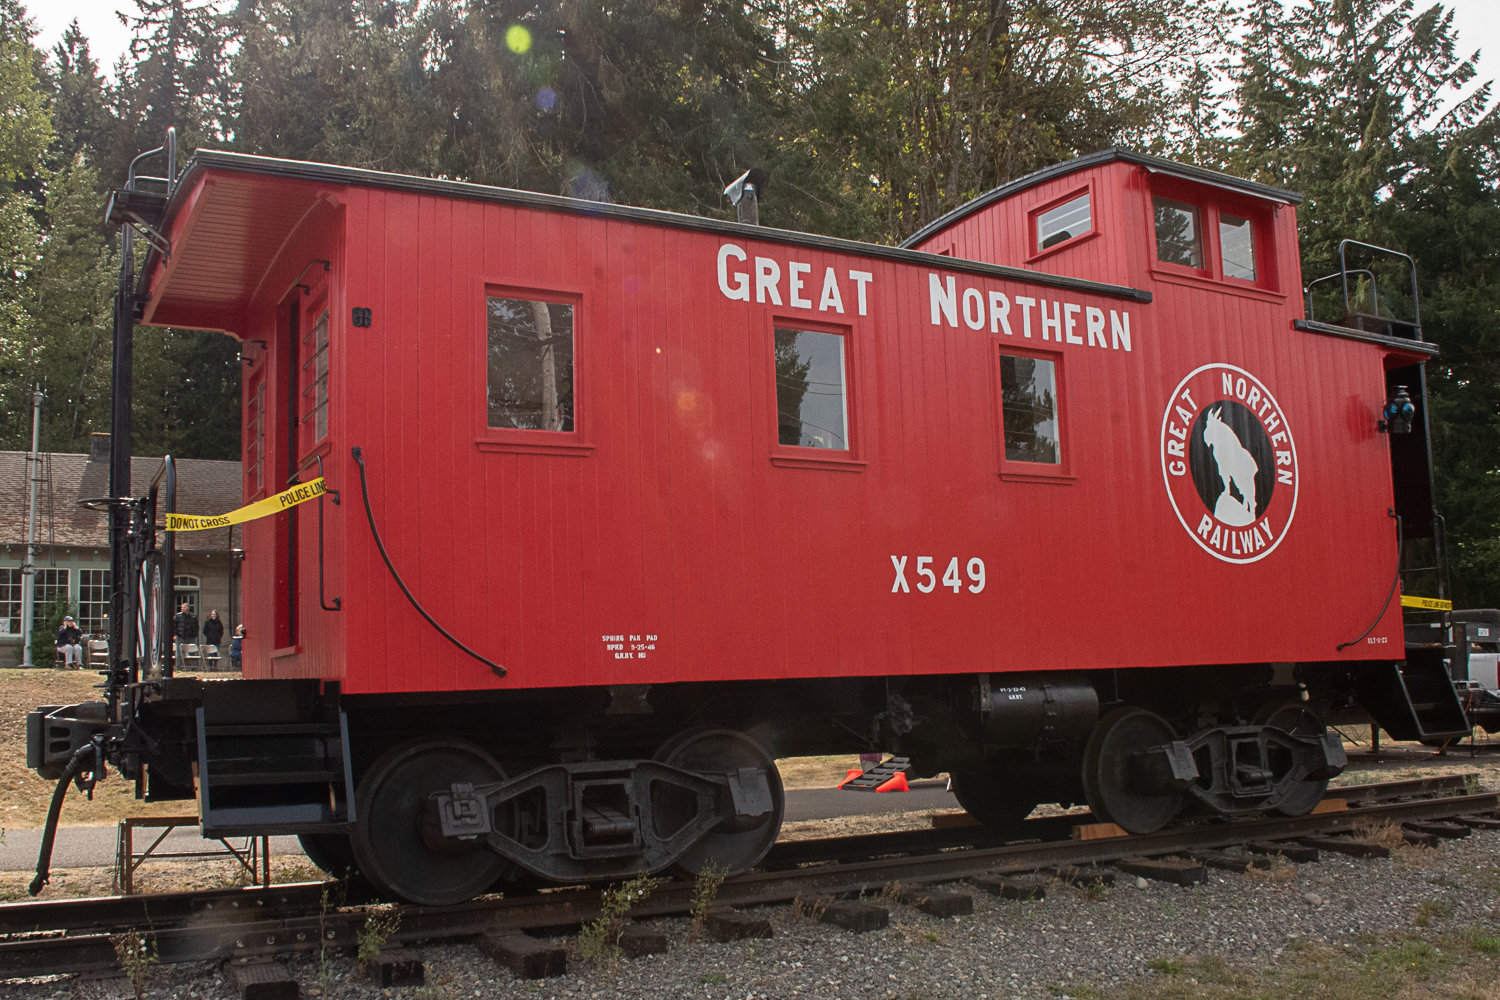 The fully restored 1923 Great Northern Railway caboose now stands in front of the Tenino Depot Museum.